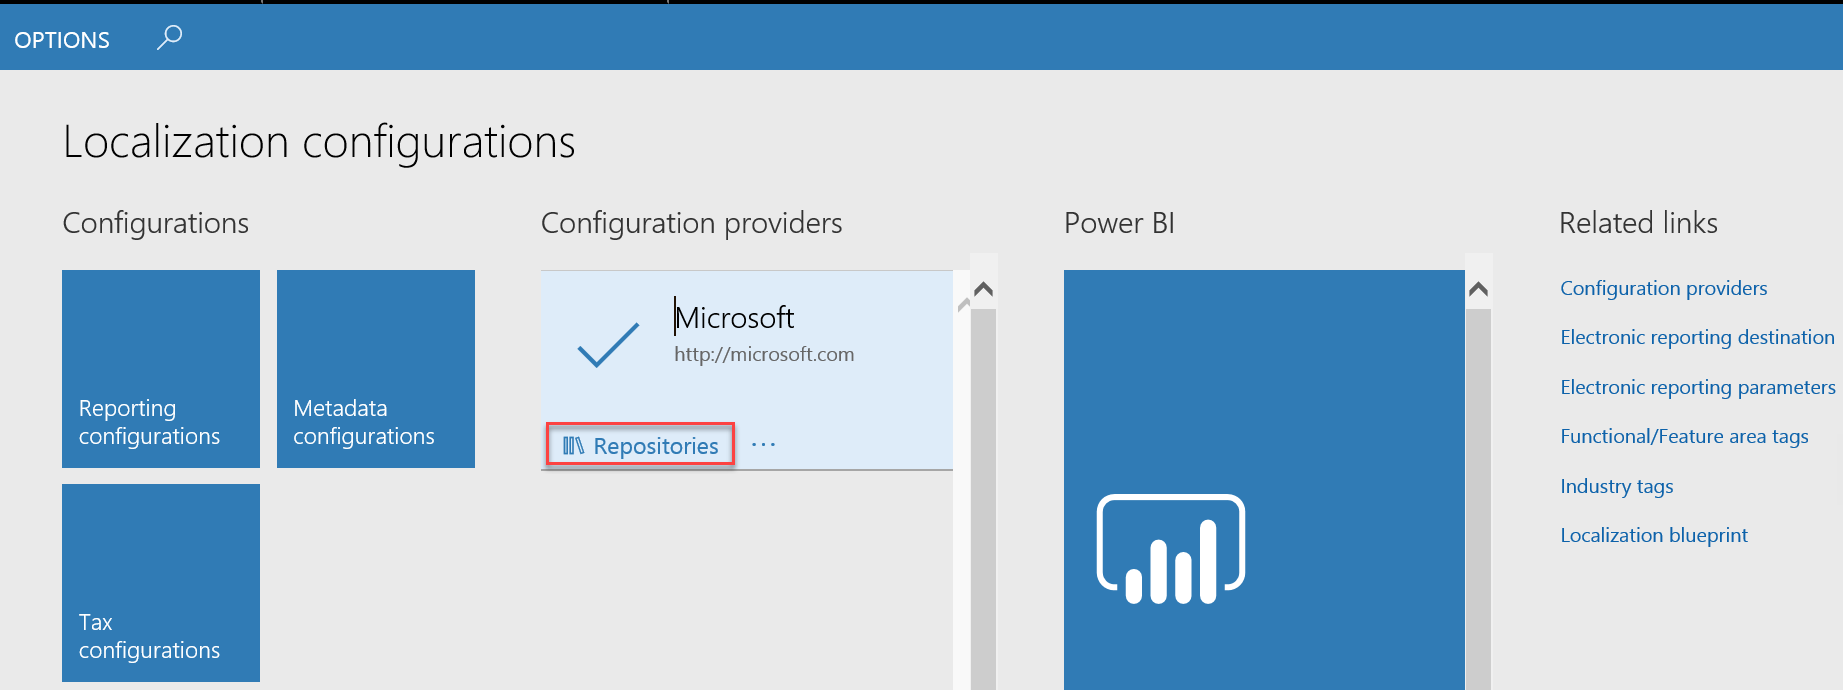 Configuration providers tile with Repositories link highlighted.